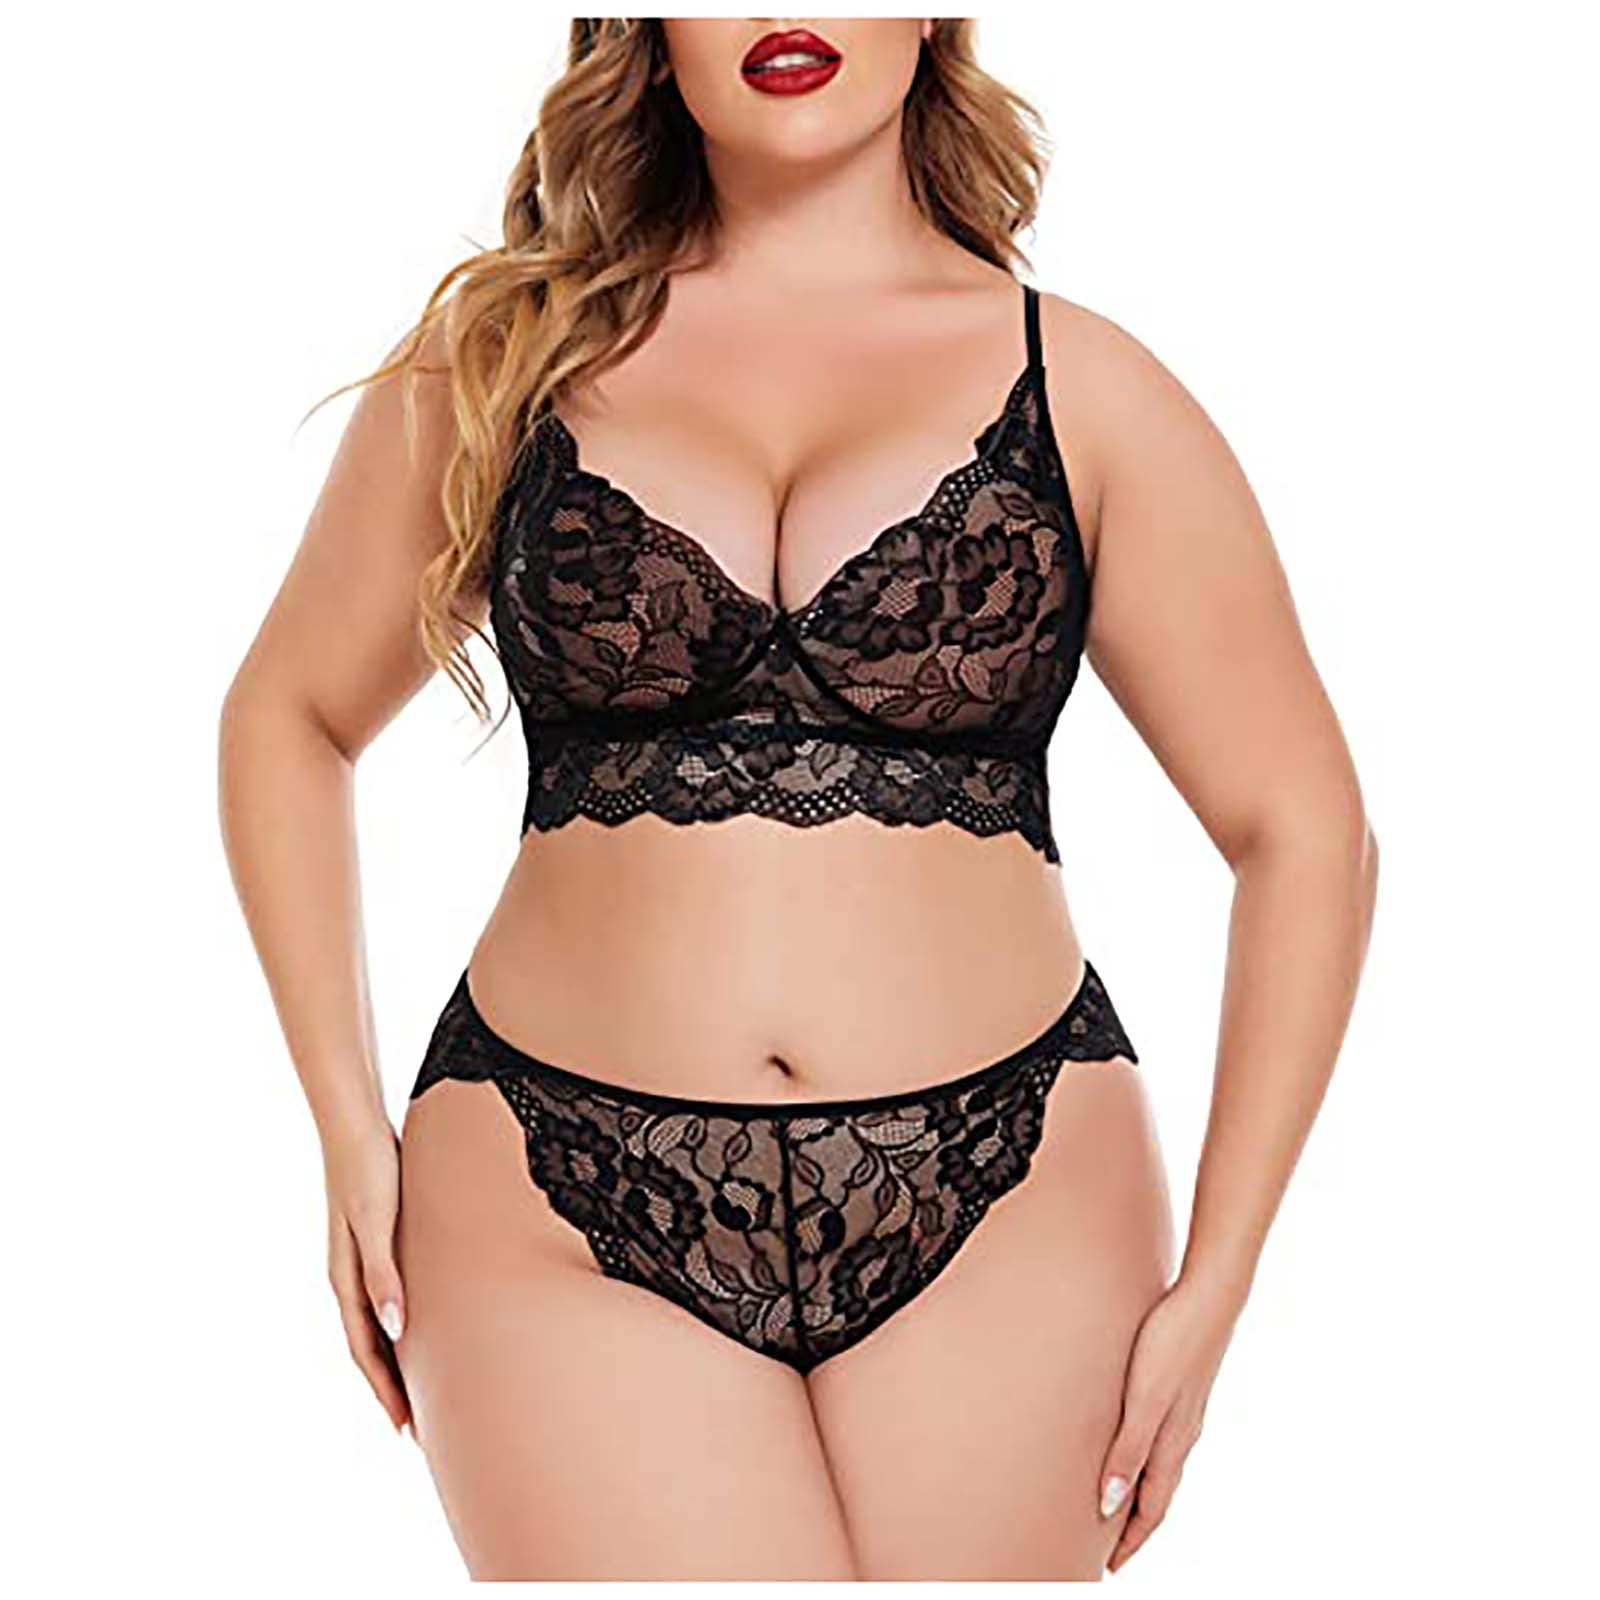 Bra and Panties Set Plus Size Sexy 2 Piece Floral Lace Underwire Lingerie  for Women XS-4X